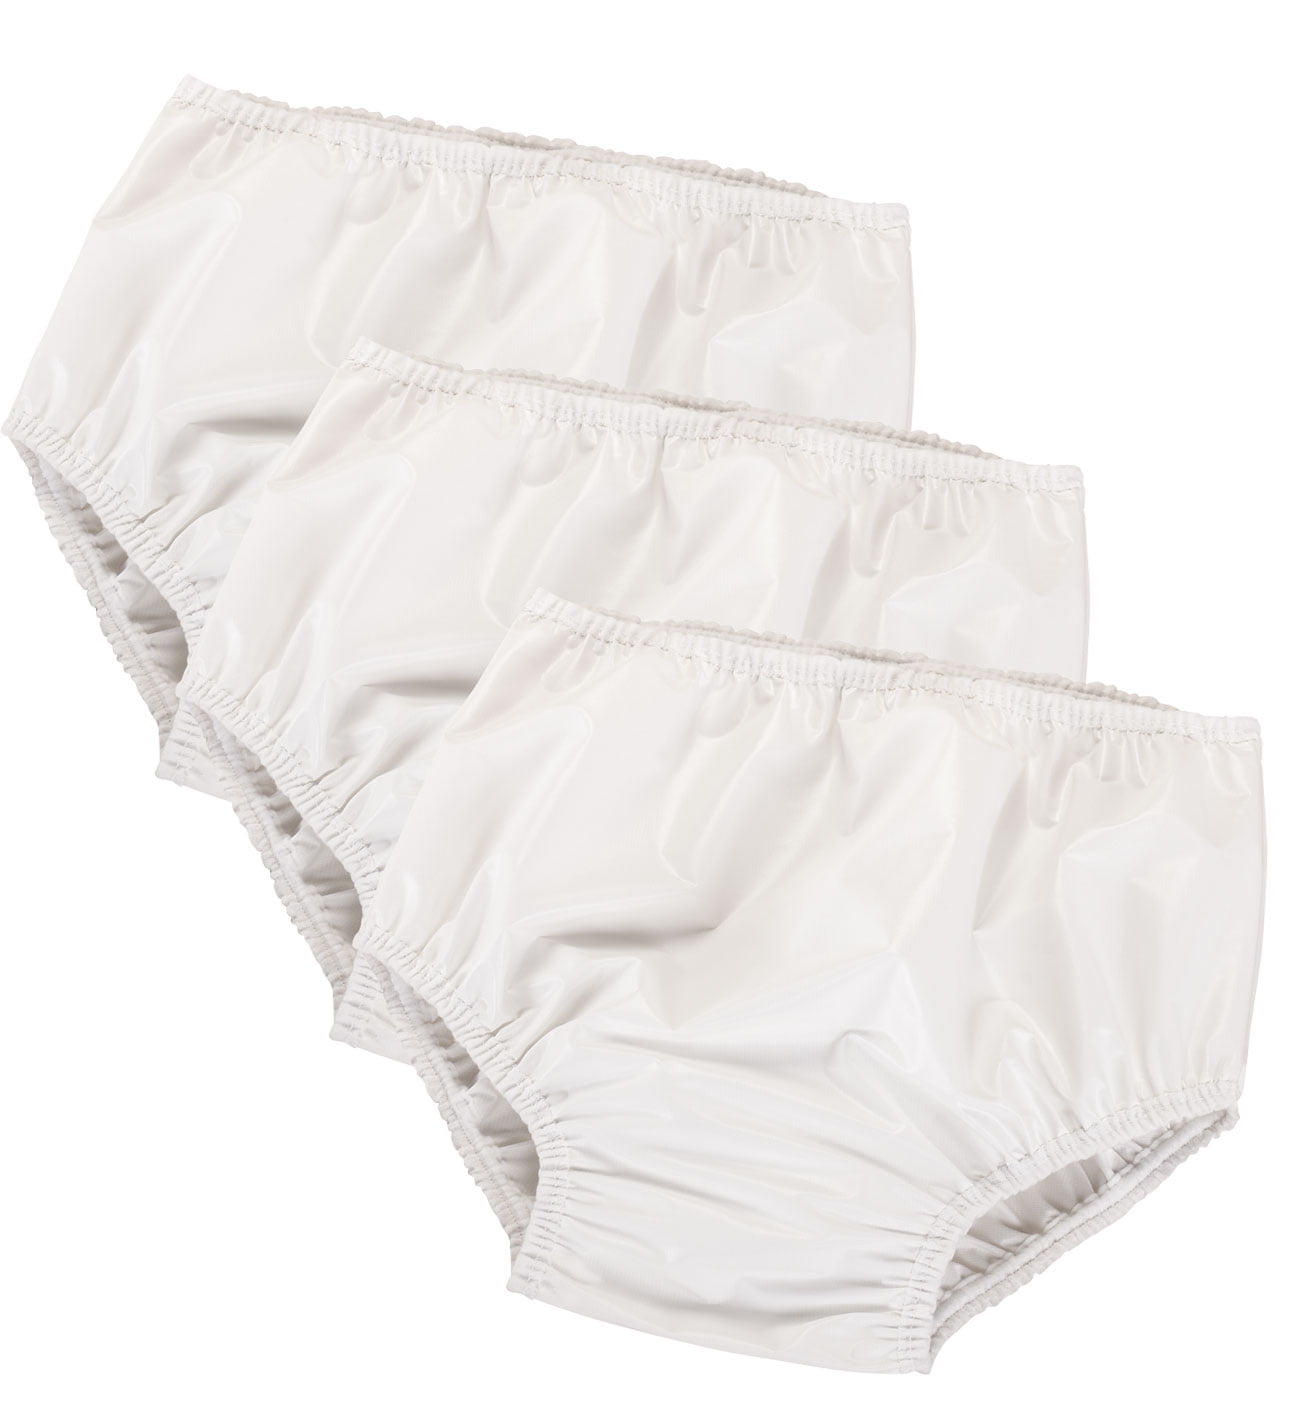 White Popping Plastic Pants PVC Adult Diaper Nappy Incontinence